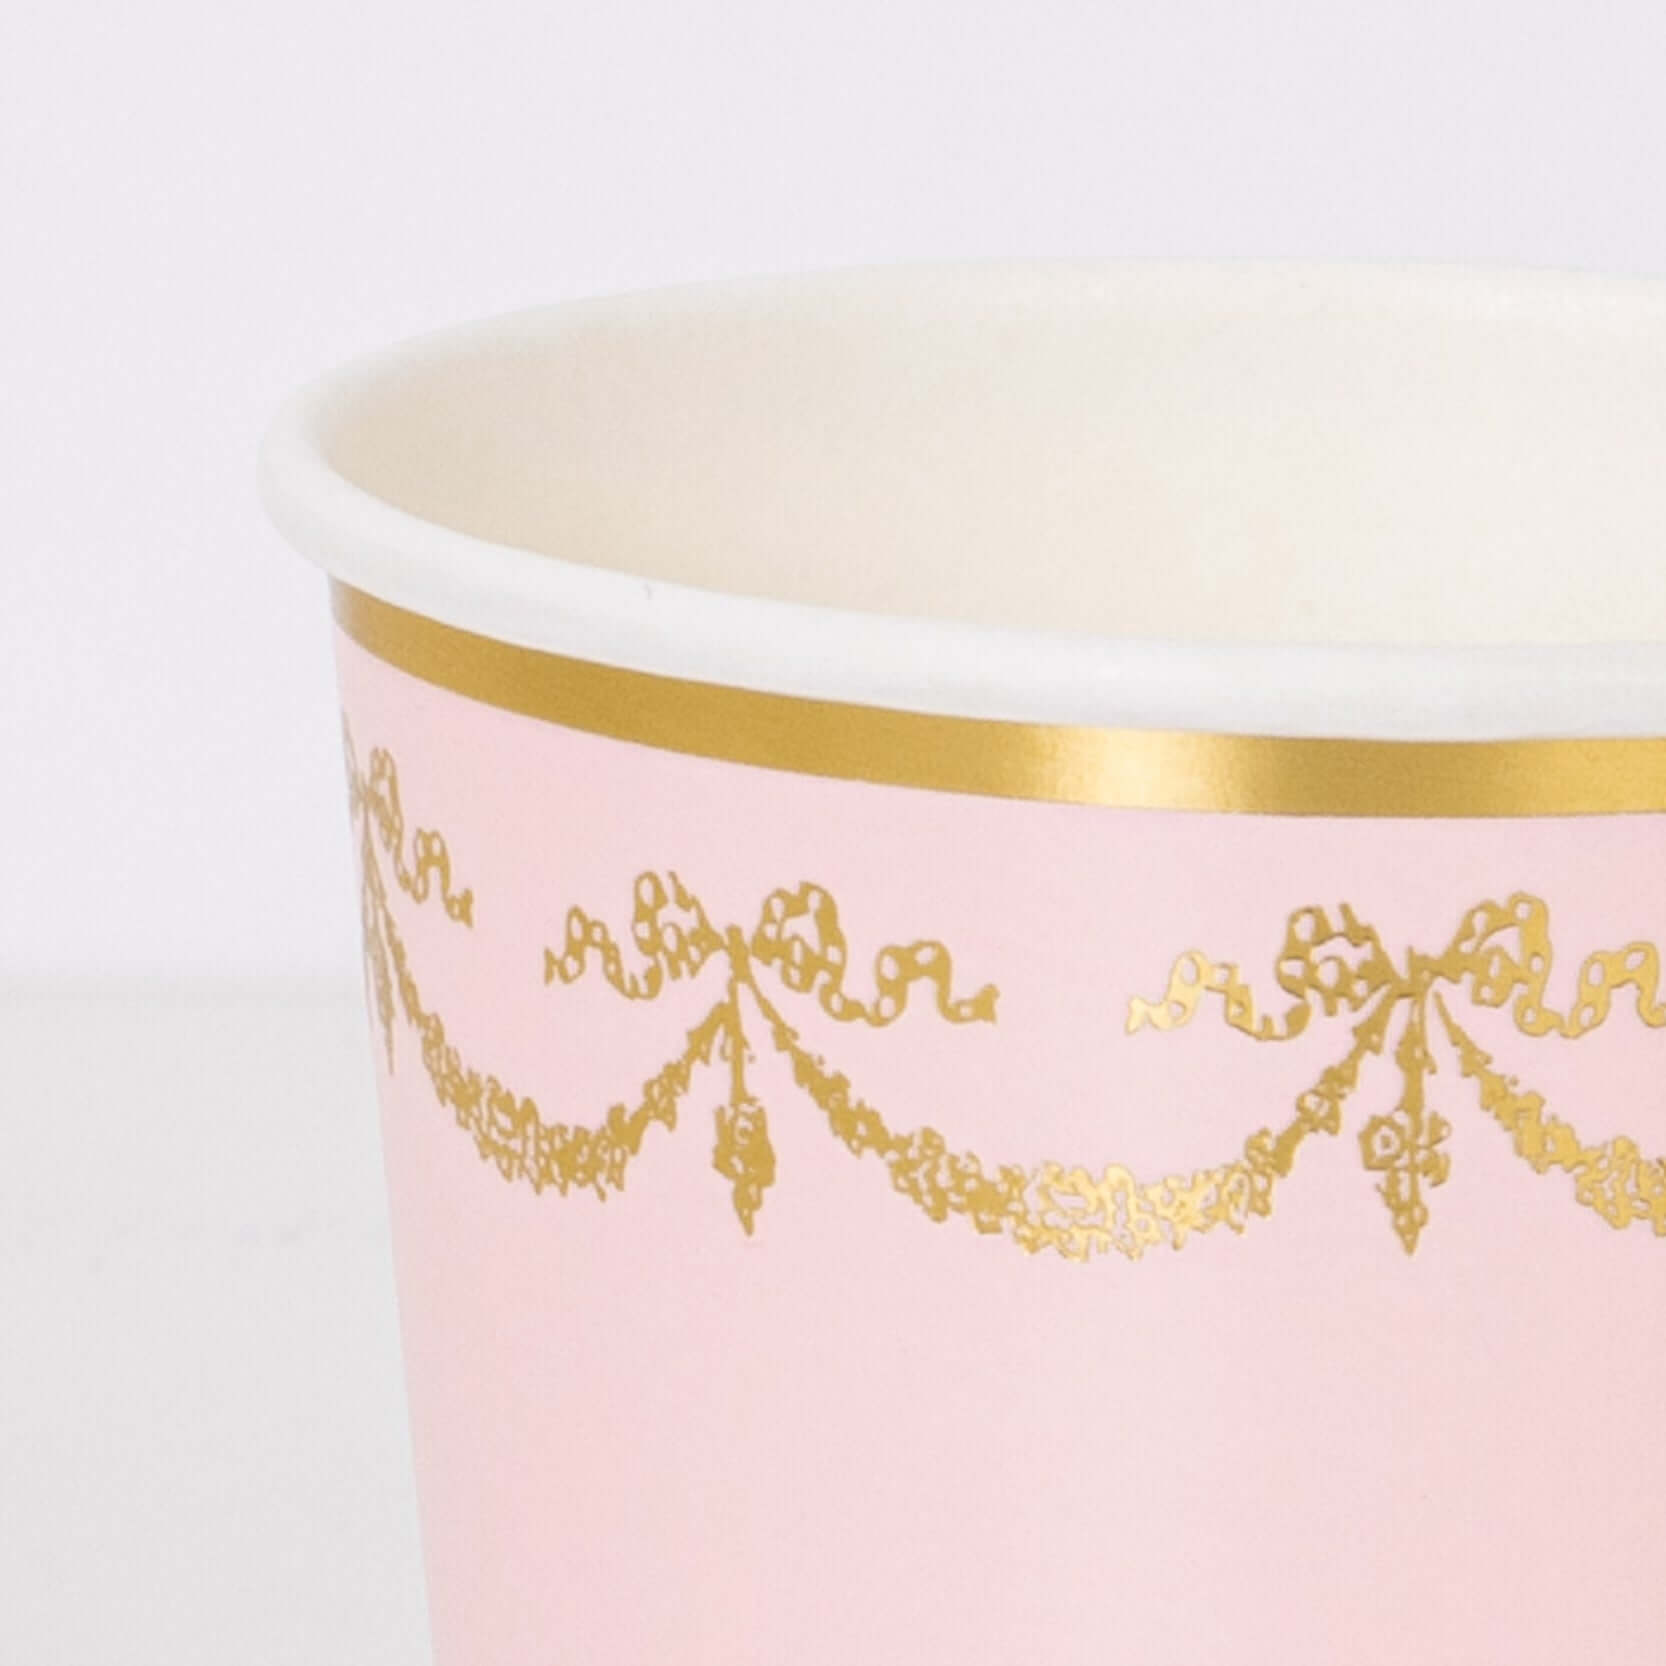 Details look of Ladurée Paris Cups by Meri Meri collaboration with Laduree, the restaurant, tea room and macaron specialist. Each set includes a blue, cream, pale pink, pale purple, mint, pale blue, pink and pale mint cup, with exquisite colors, gold foil design and borders. Perfect for Ladurée lovers, afternoon tea party, mother's day celebration, girls party and any fancy celebration